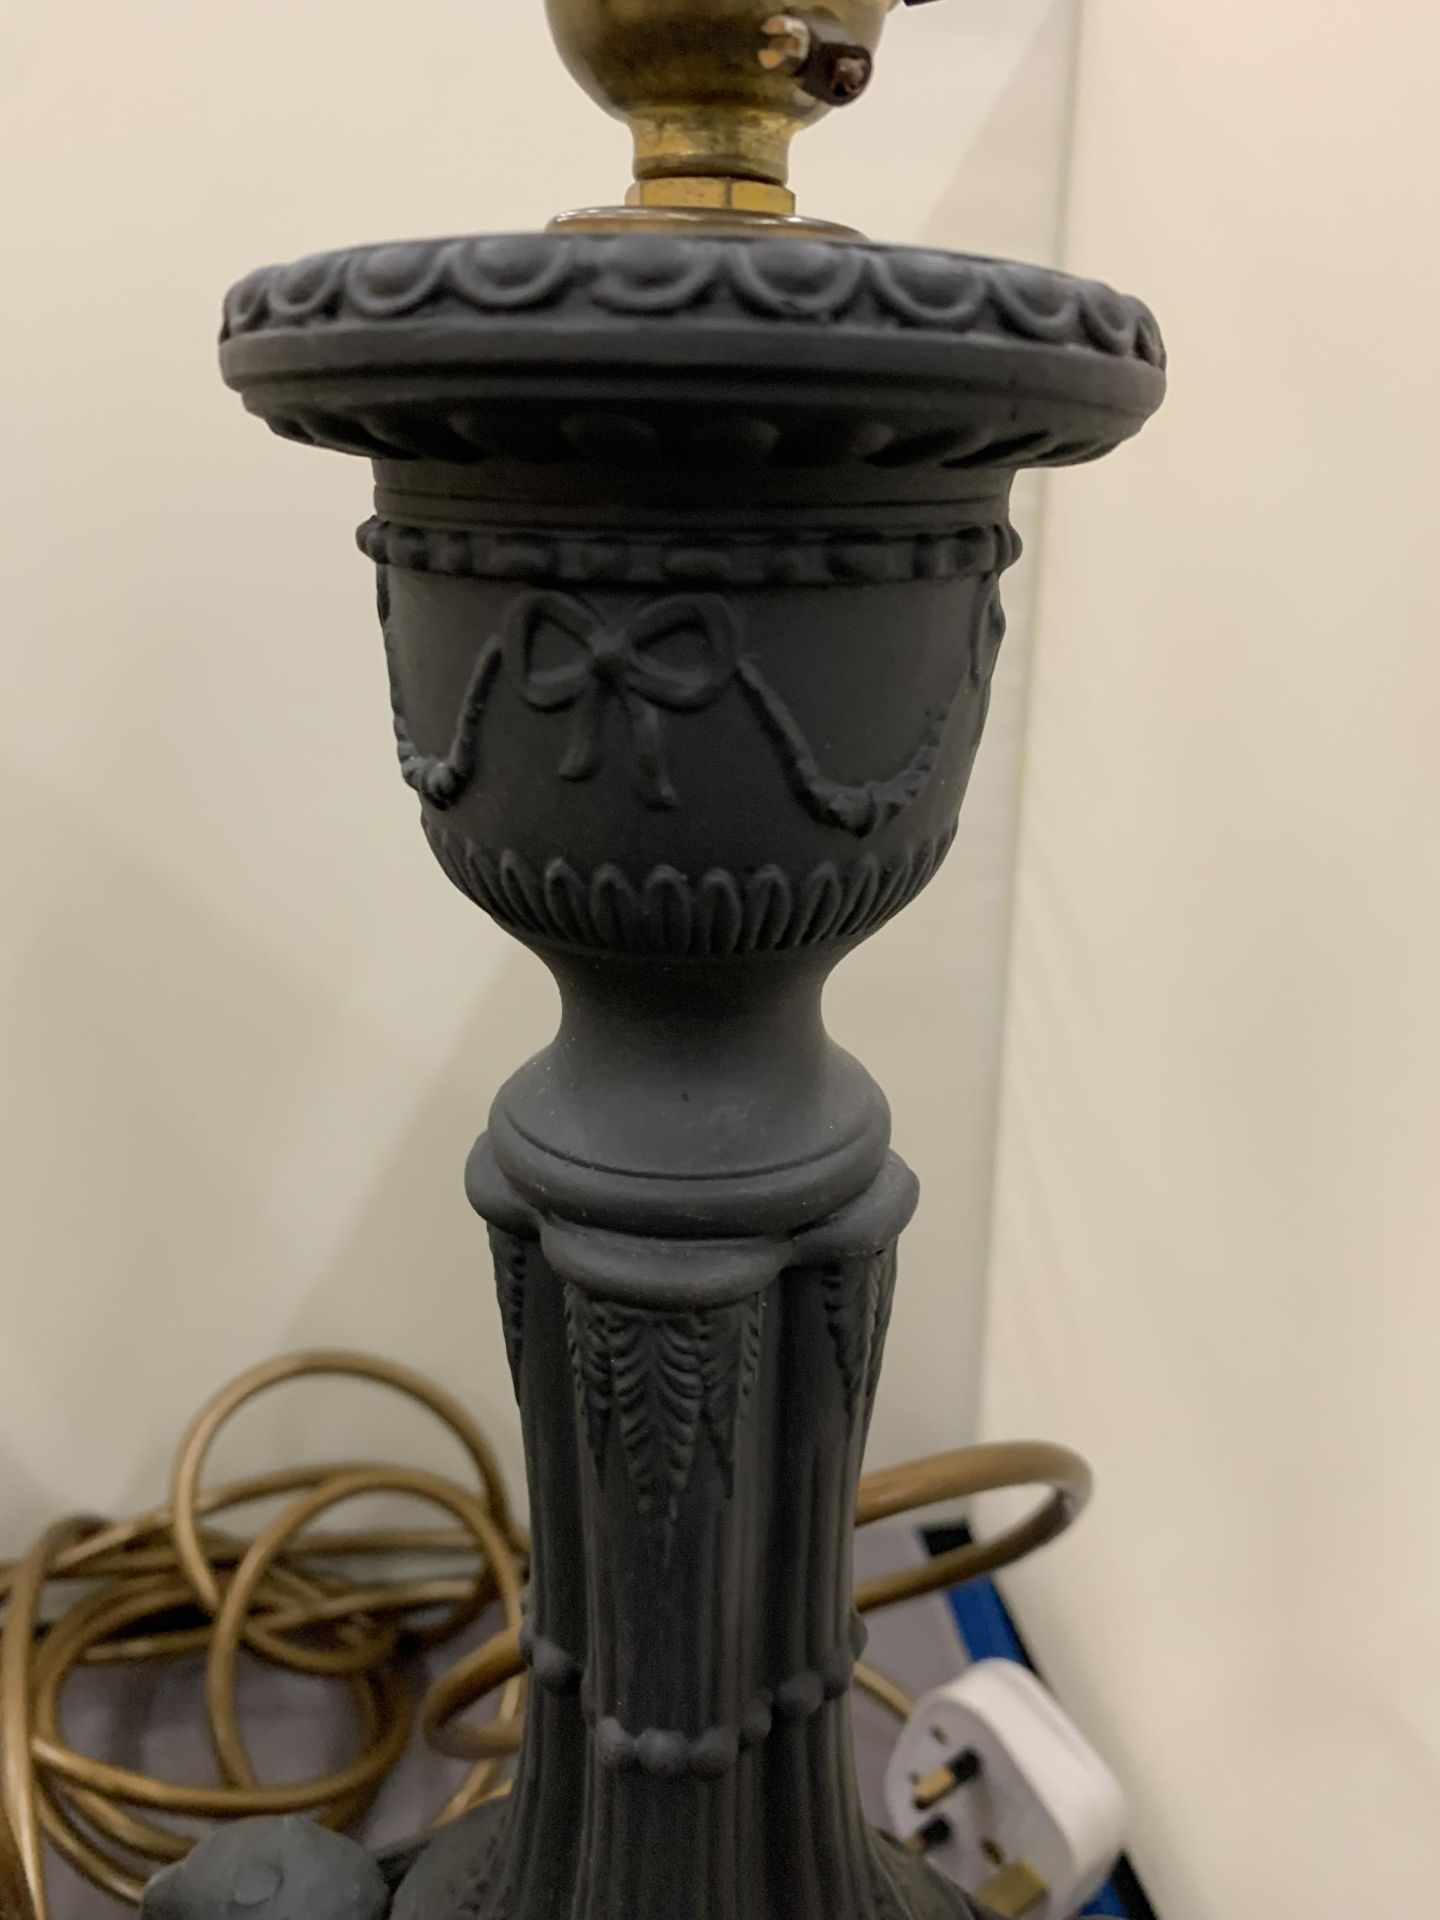 A PAIR OF BLACK CERAMIC LAMPS WITH DOUBLE SPHINX DESIGN - Image 4 of 4